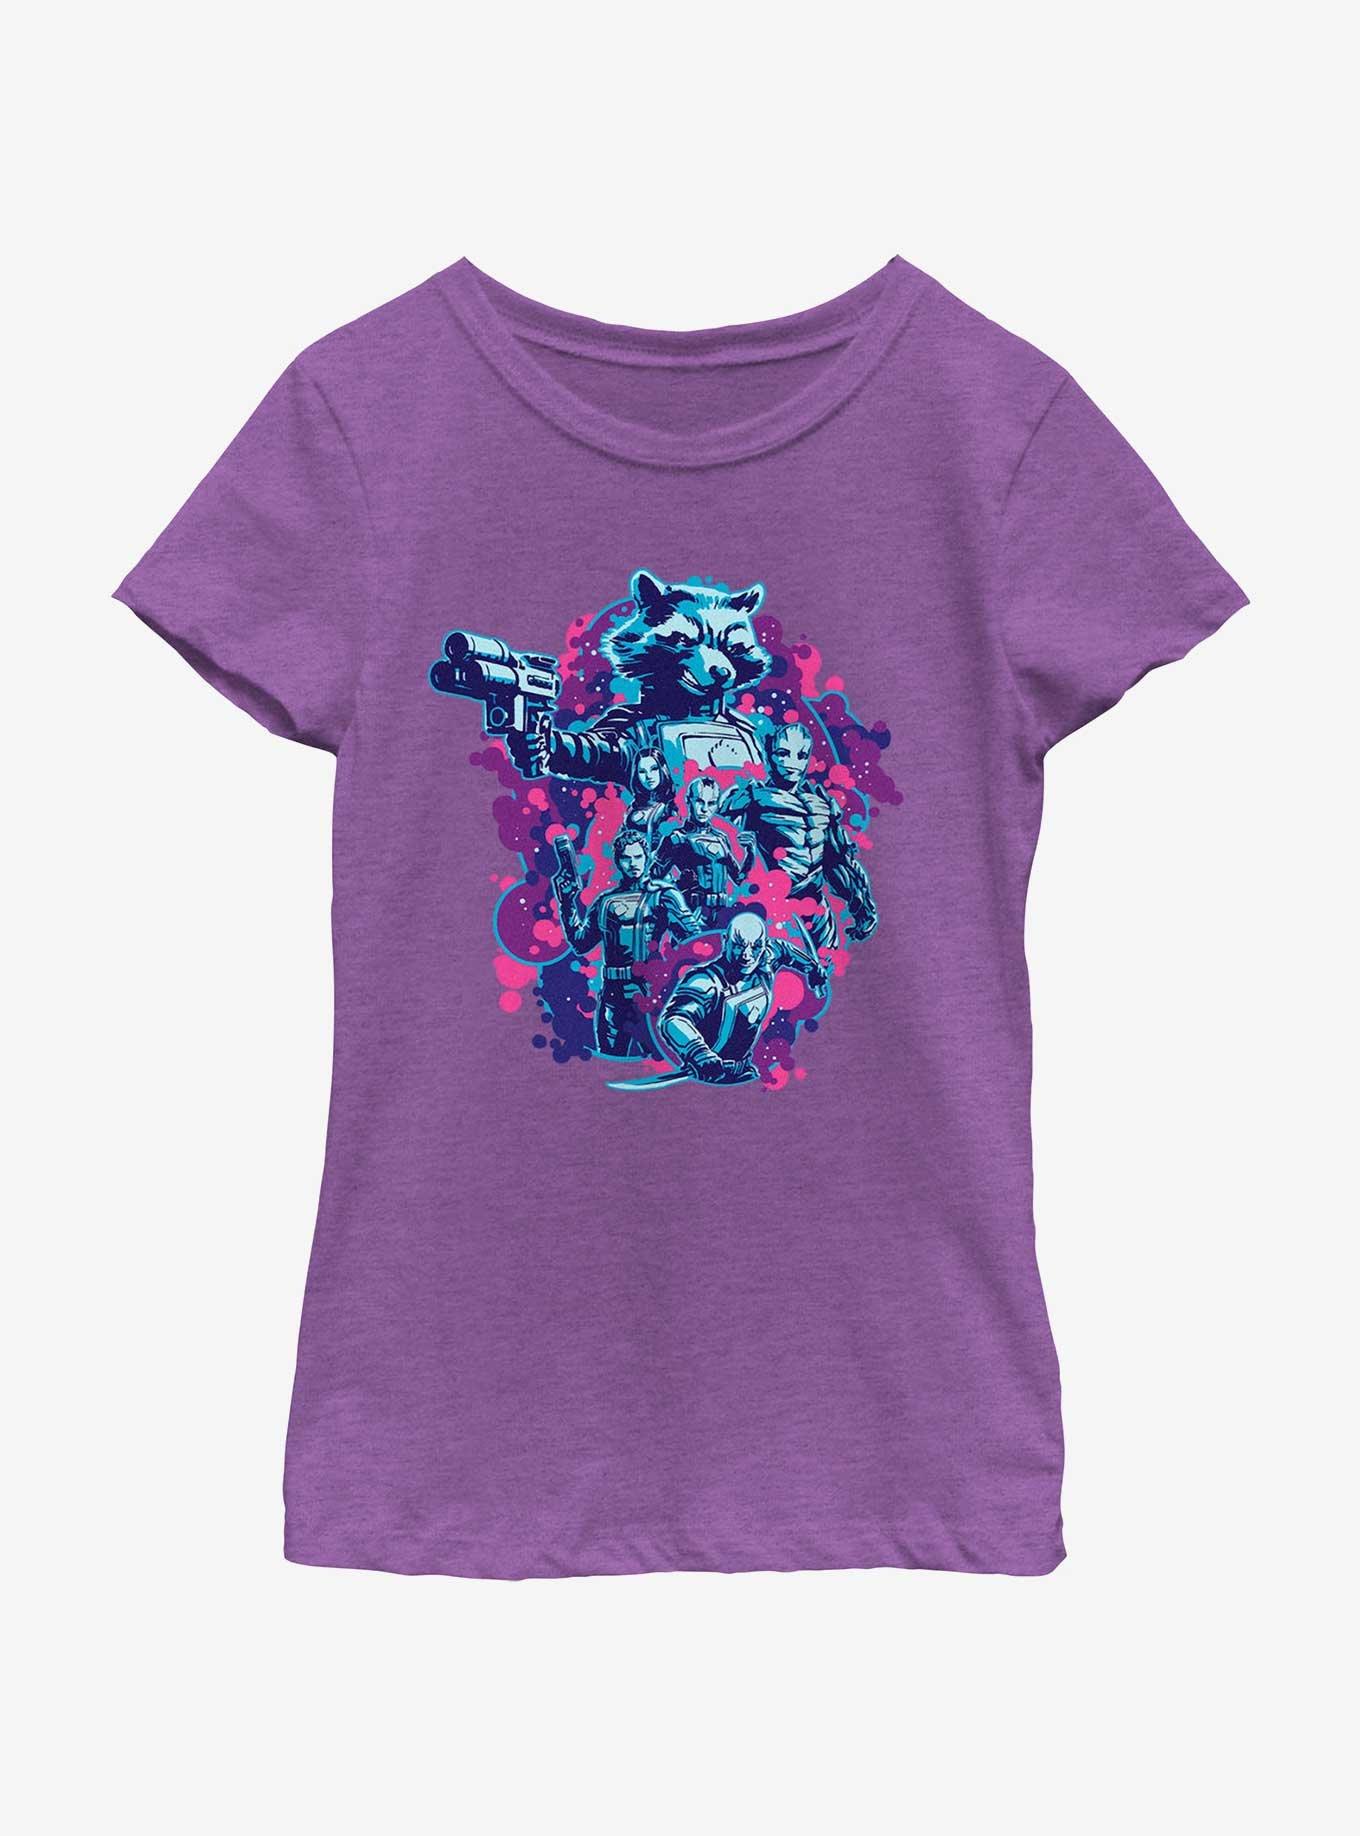 Marvel Guardians of the Galaxy Rocket's Crew Girls Youth T-Shirt, PURPLE BERRY, hi-res